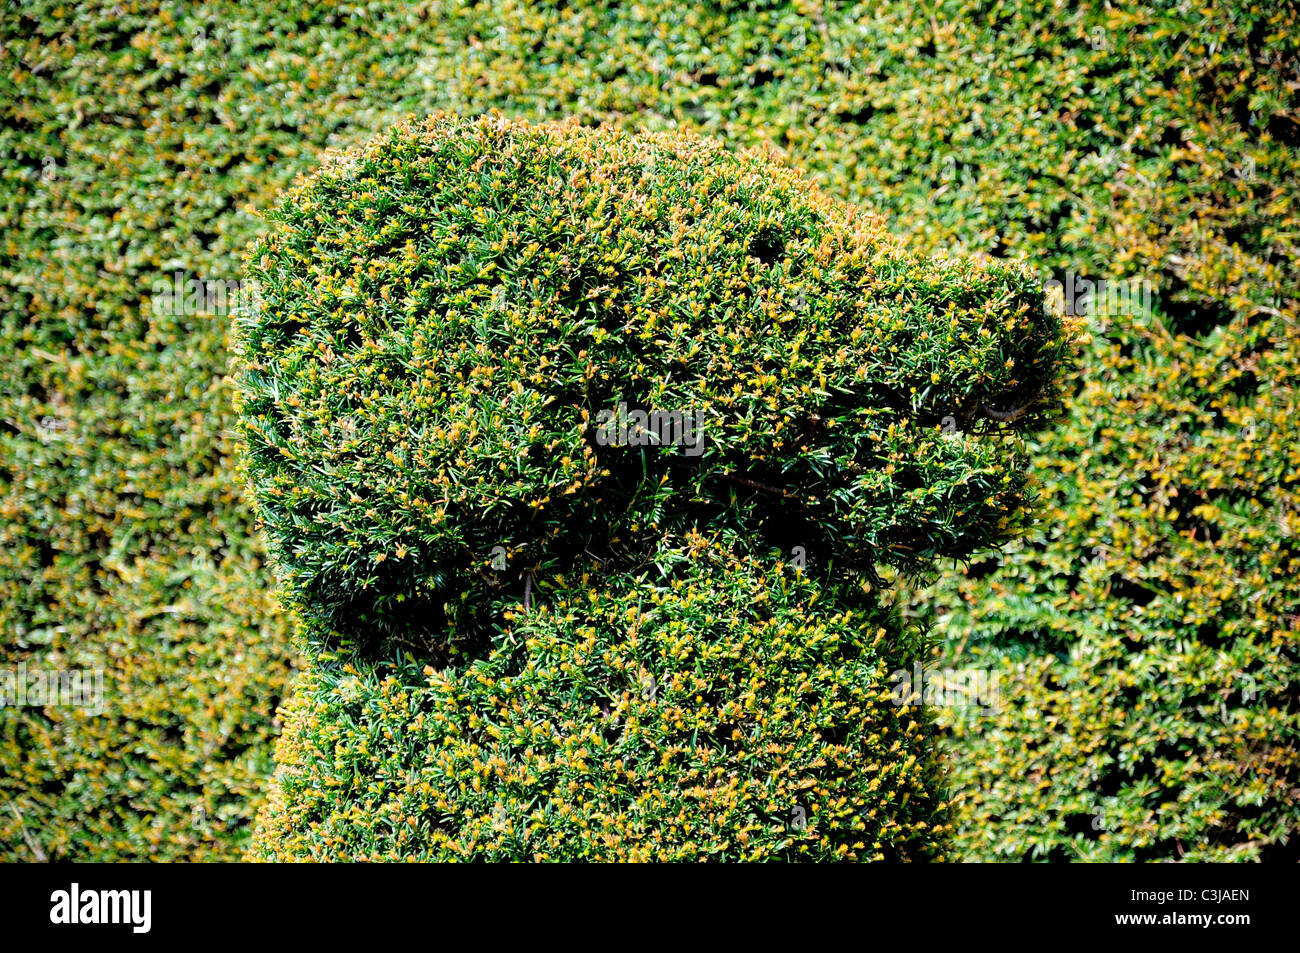 Profile of dog head created in hedge with topiary. Stock Photo